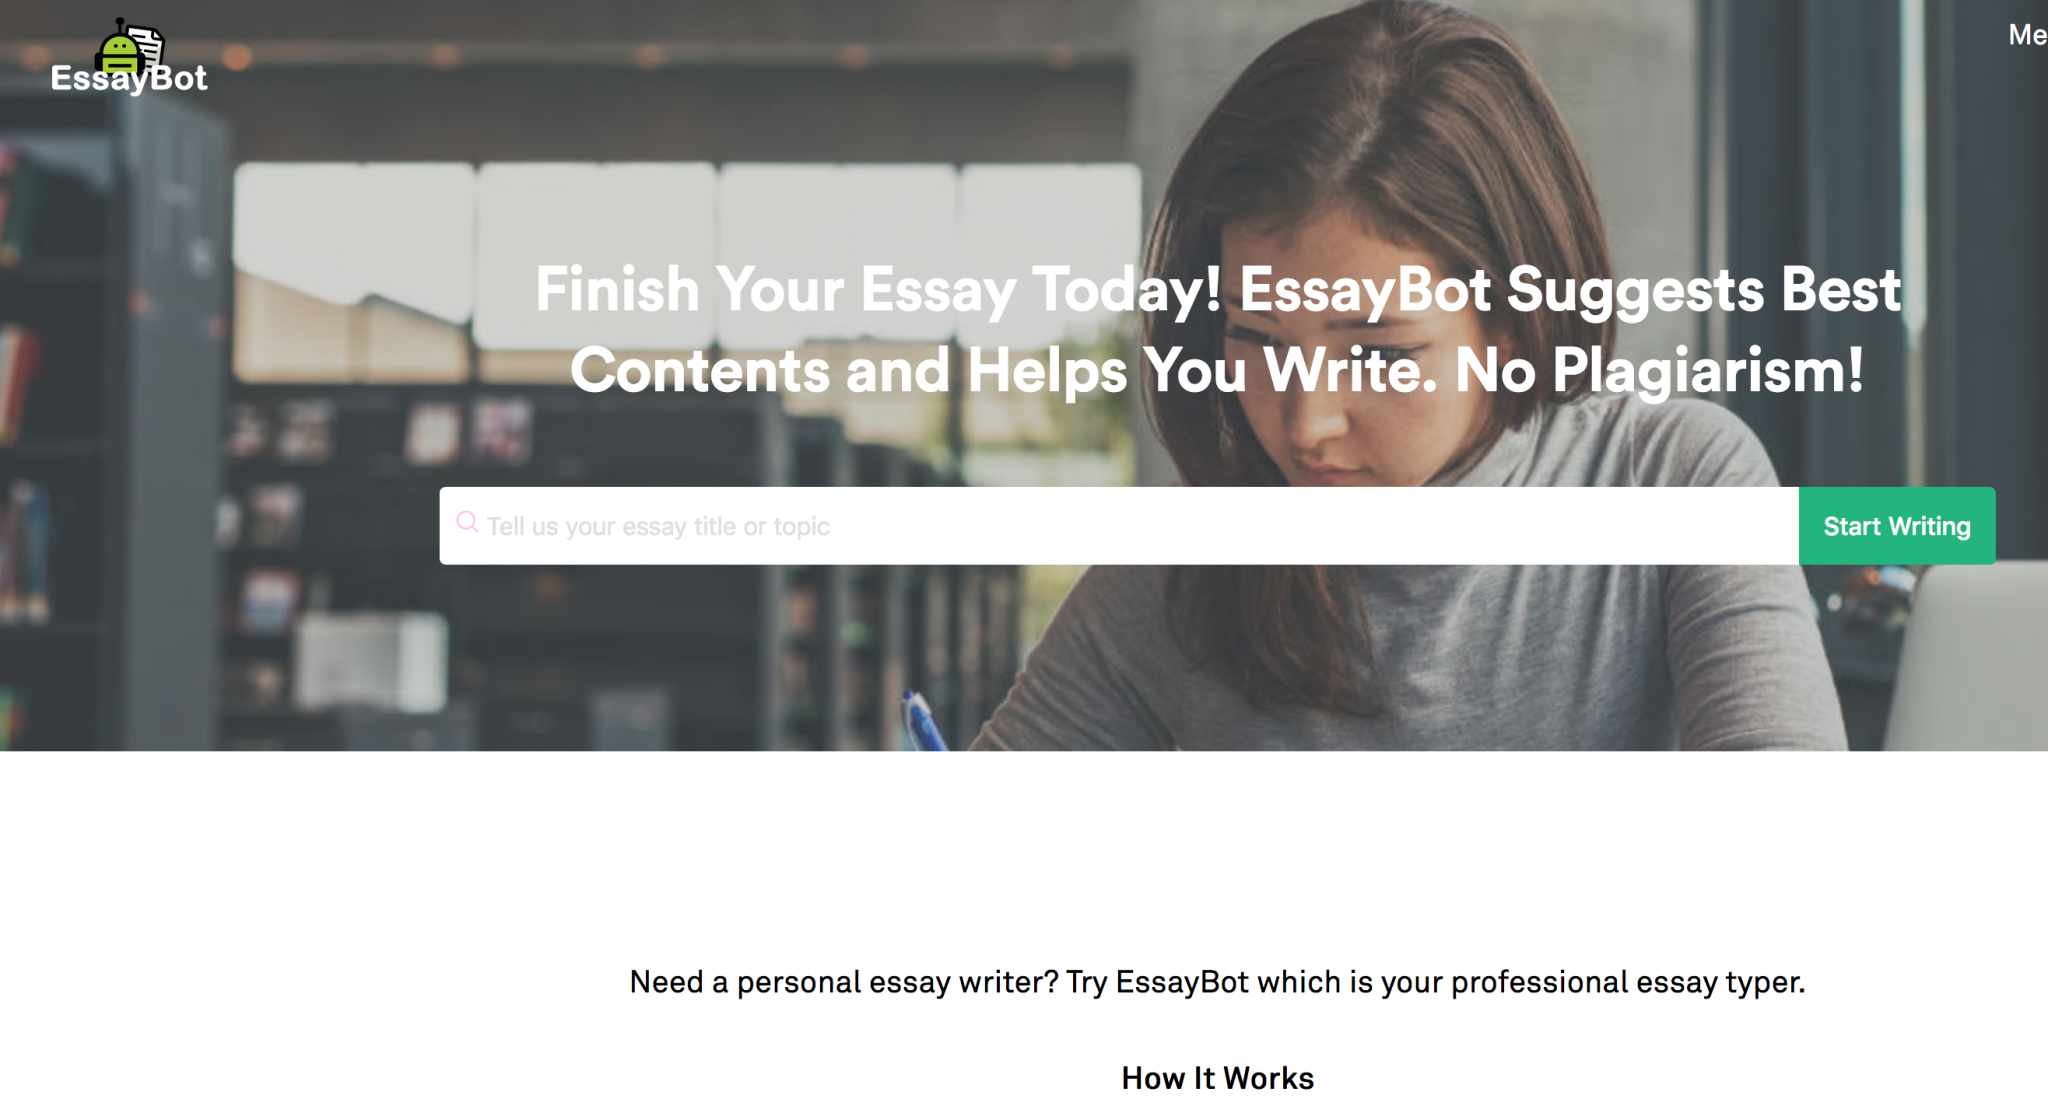 Free essay writers: myth or reality? | Best-essay-services.com